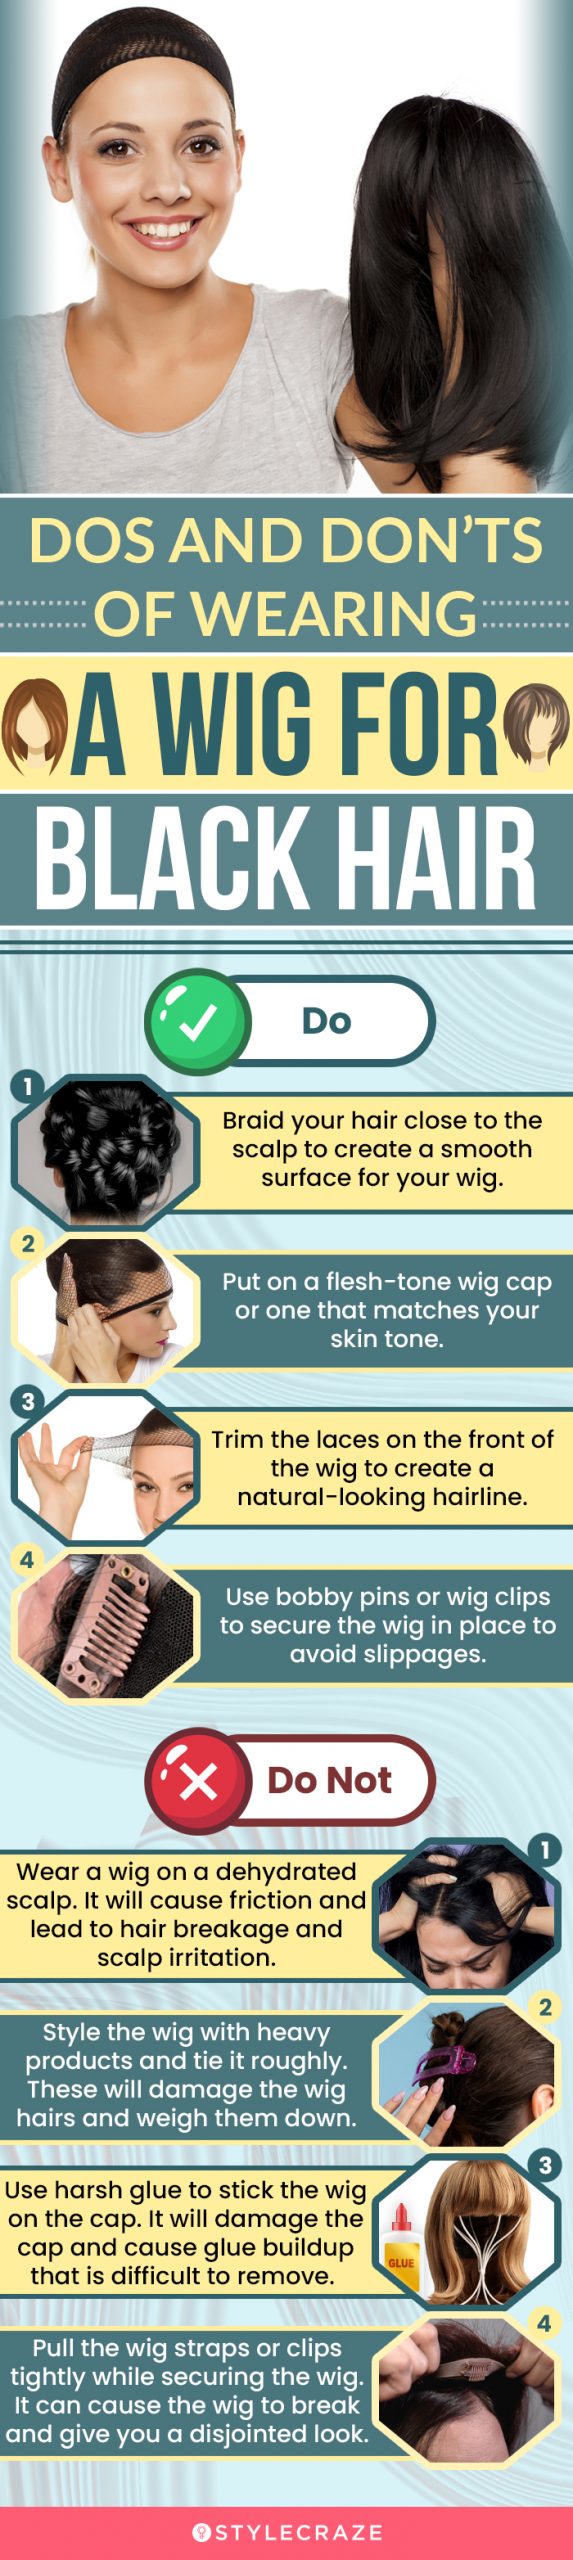 Dos And Don’ts Of Wearing A Wig For Black Hair (infographic)